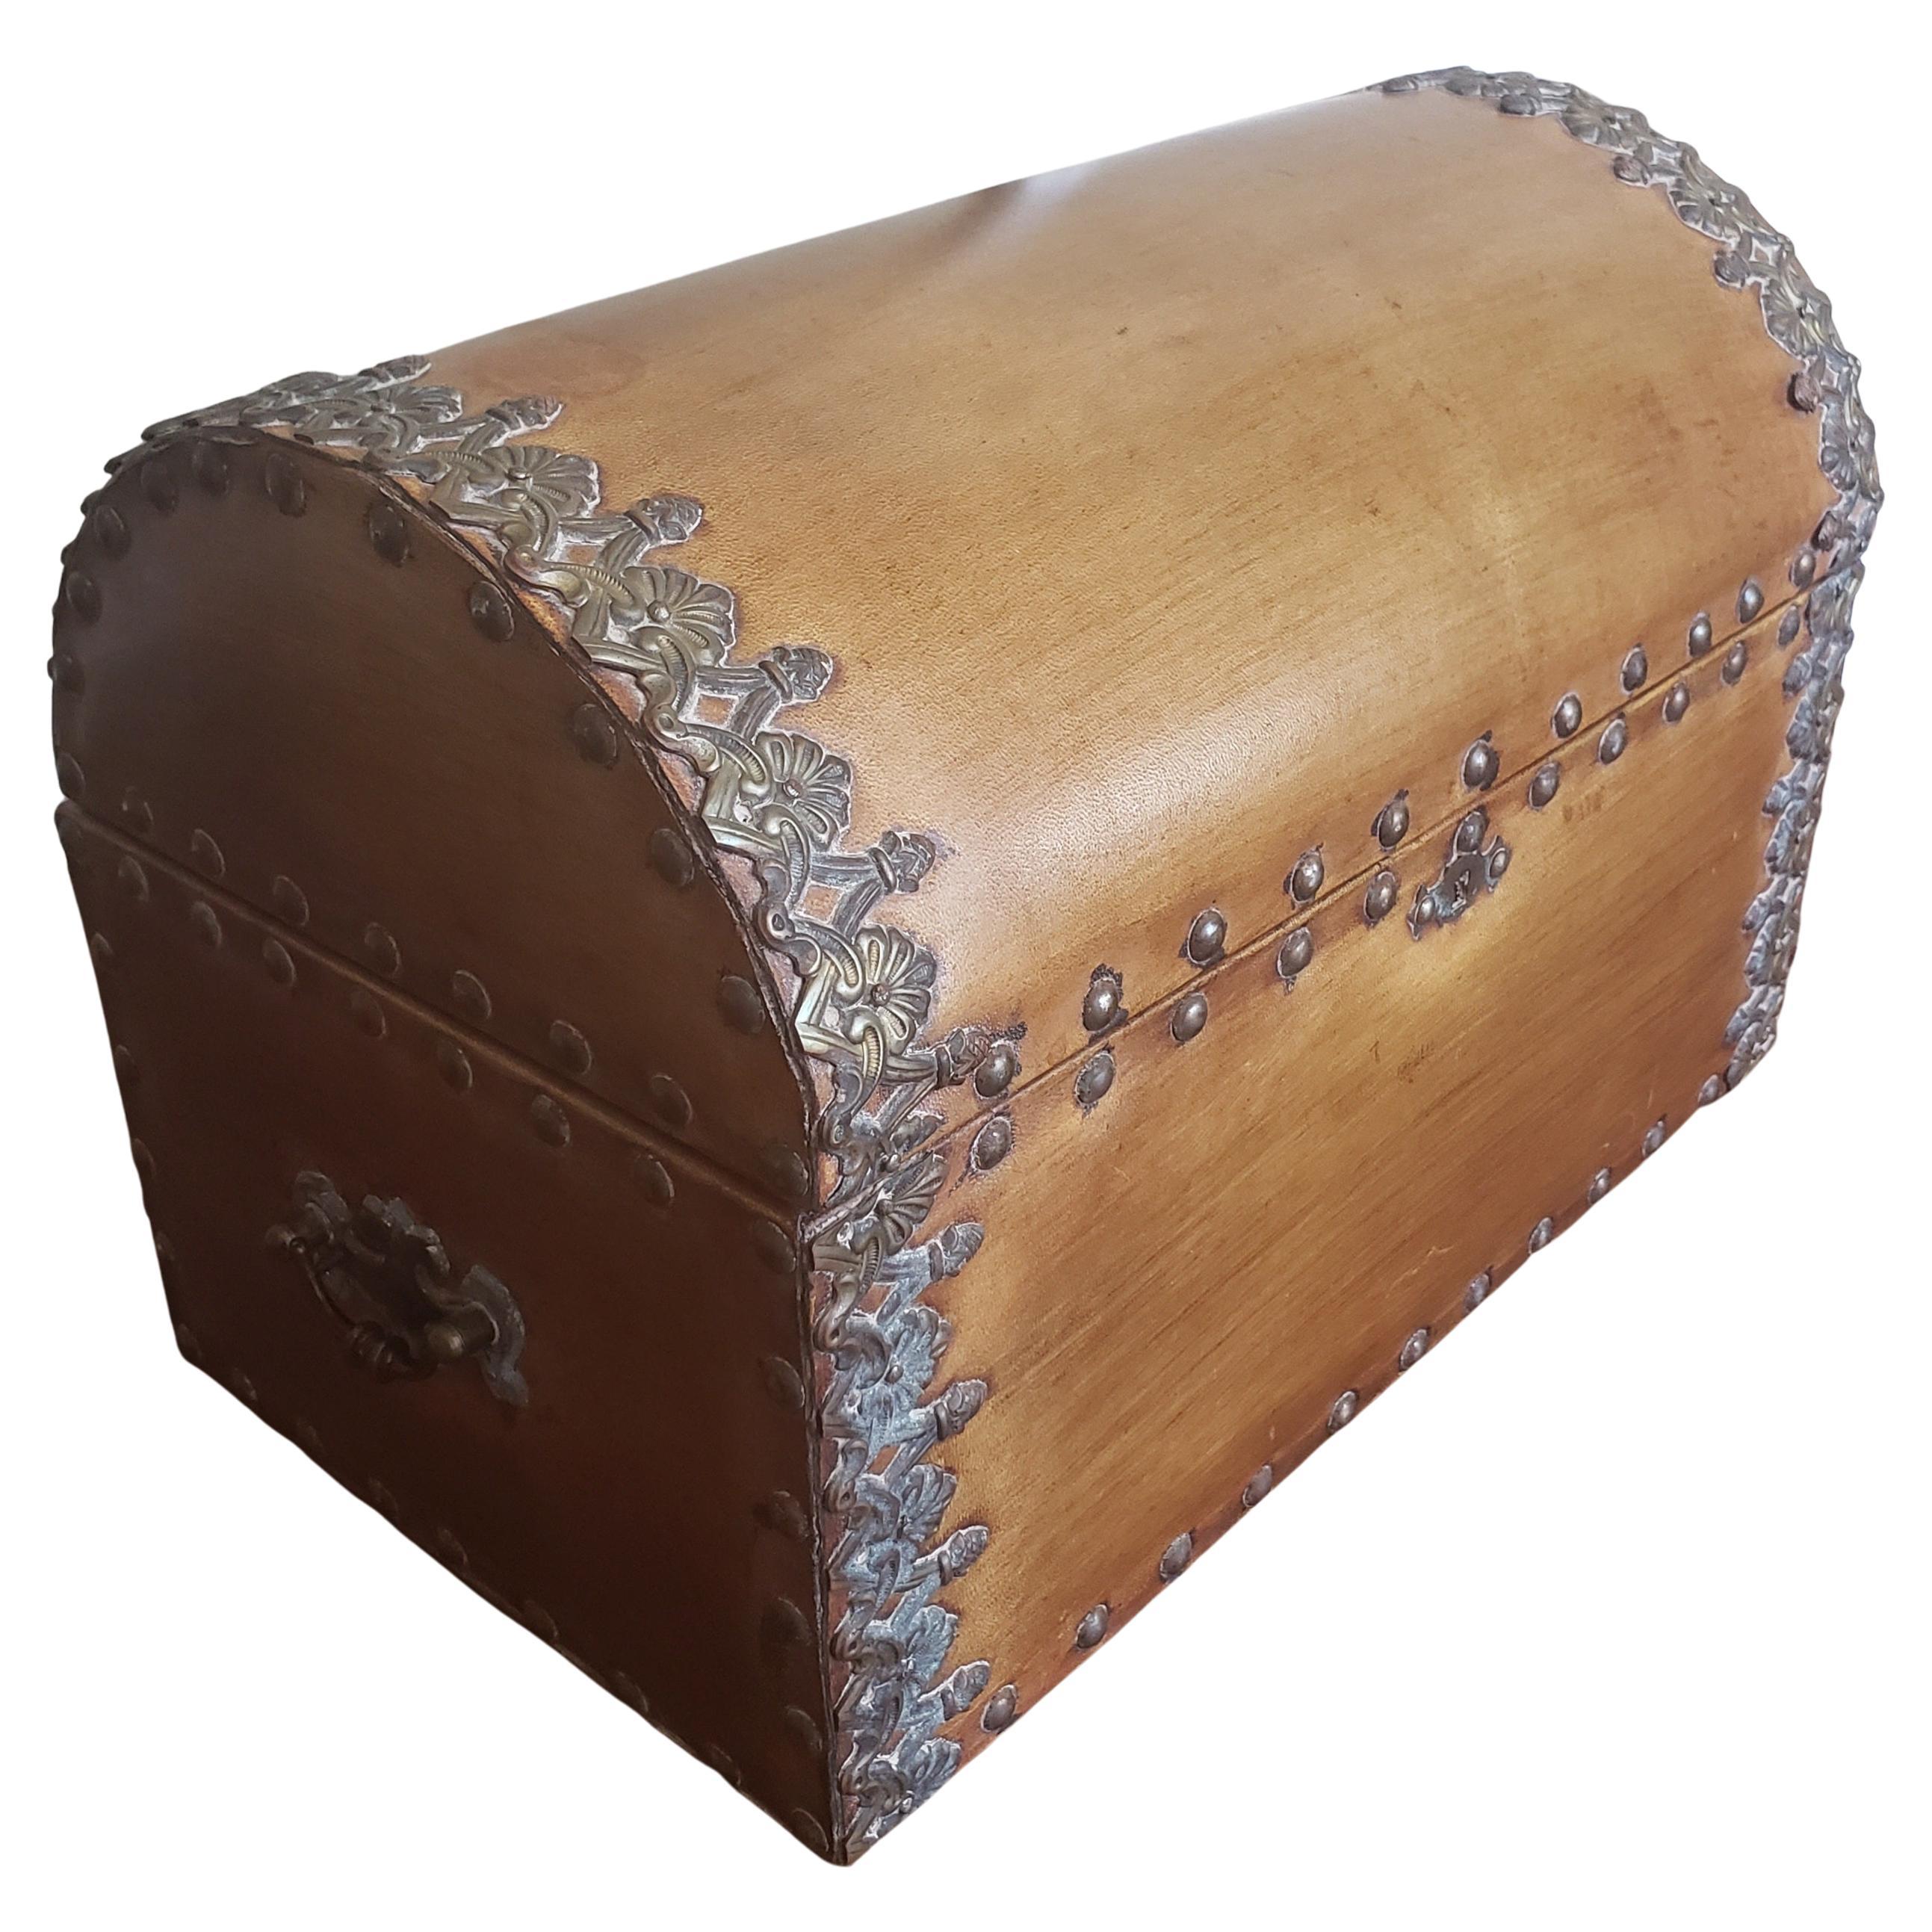 20th Century Spanish Colonial Style  Ornate Leather & Nail Heads Document Chest In Good Condition For Sale In Germantown, MD